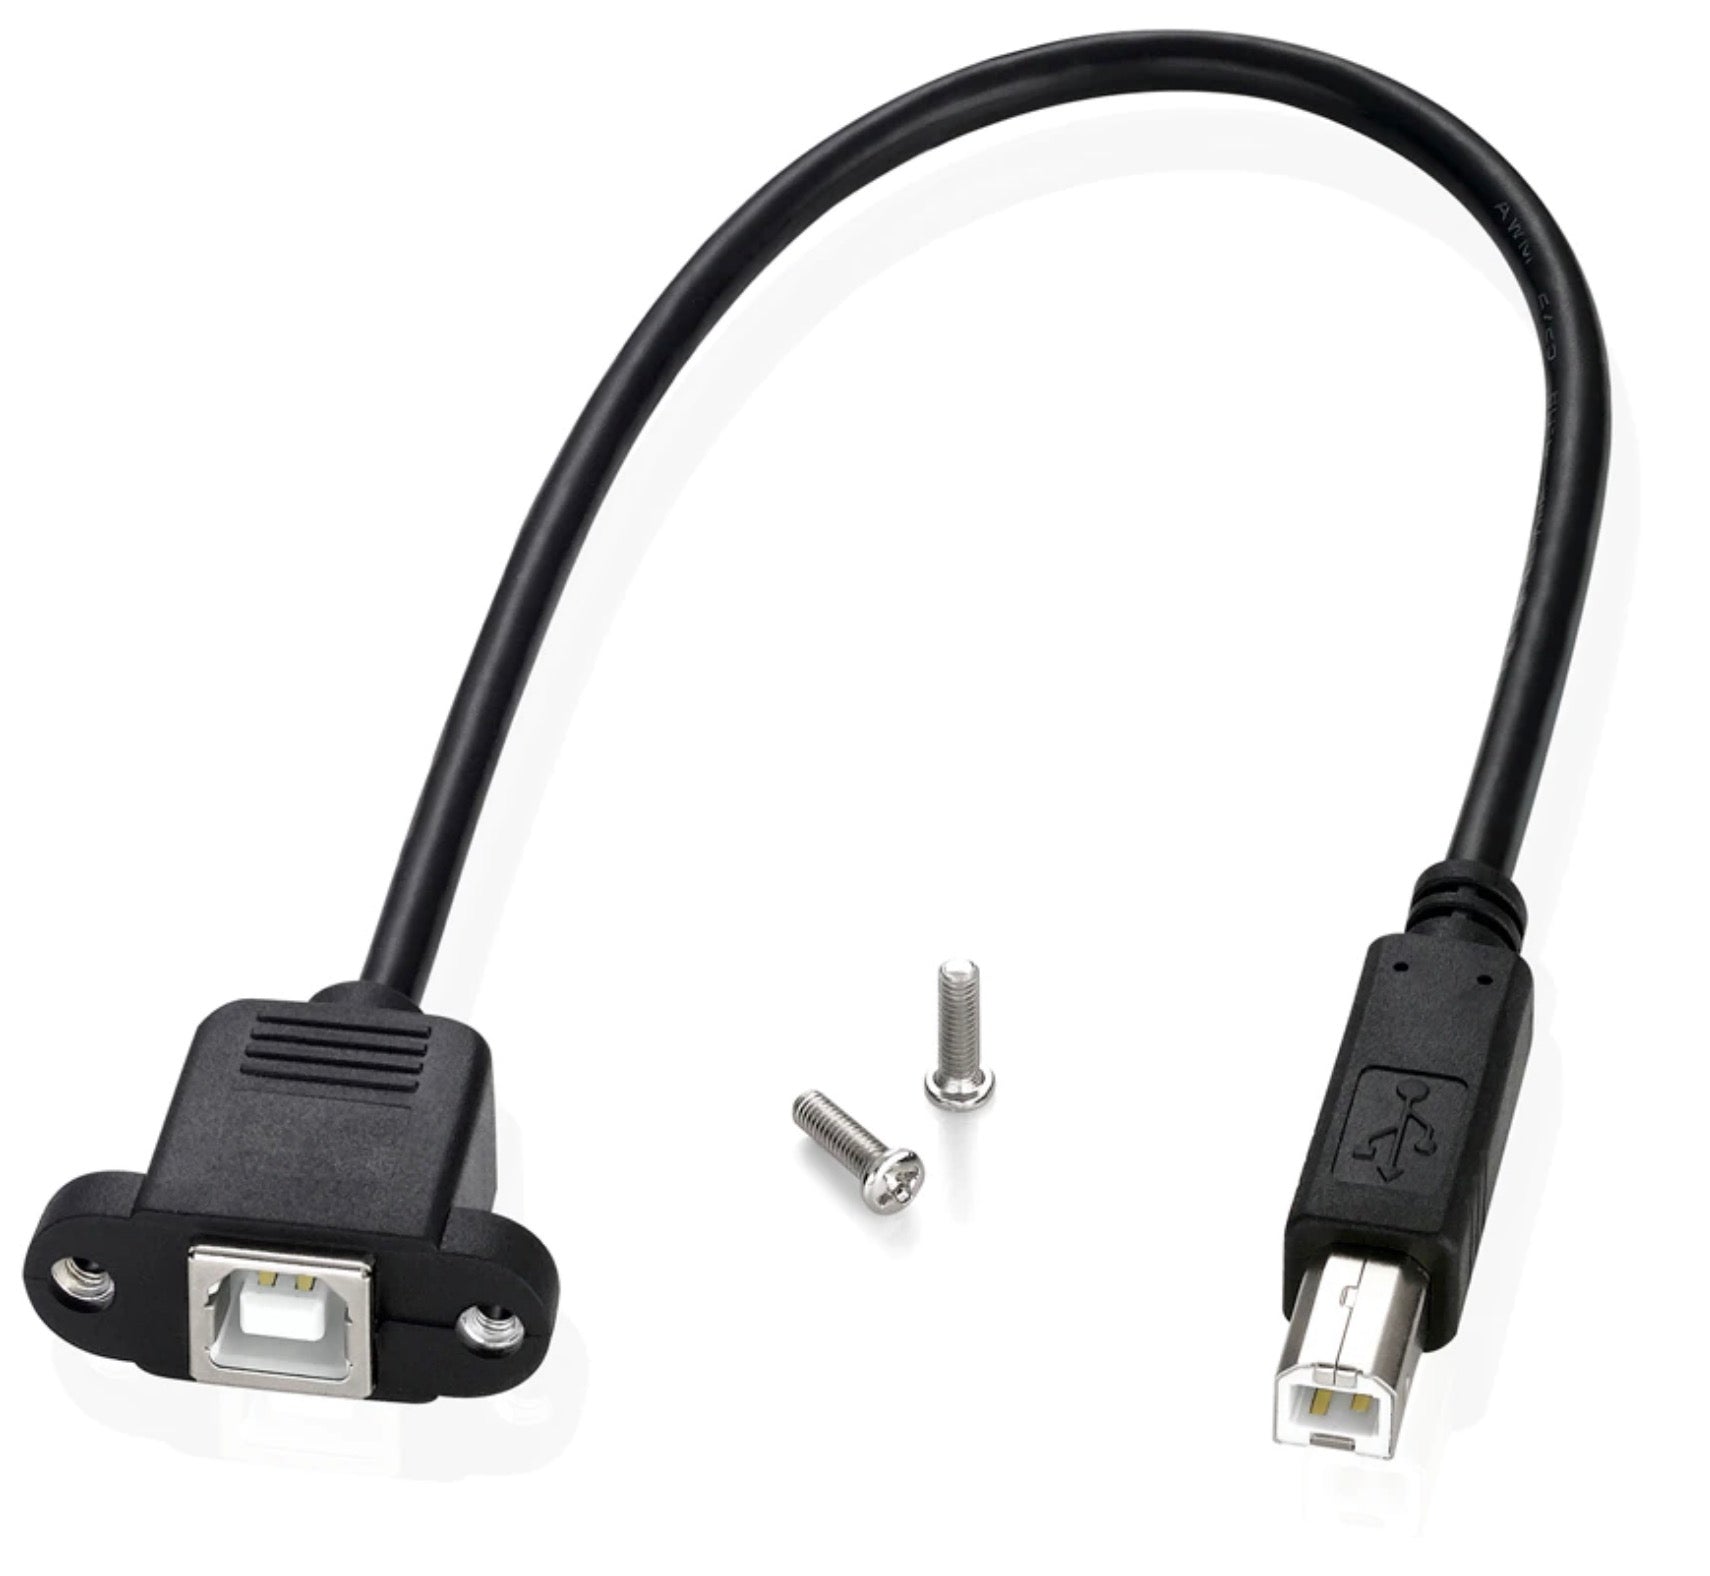 USB 2.0 Type B Male to Female Printer Extension Cable